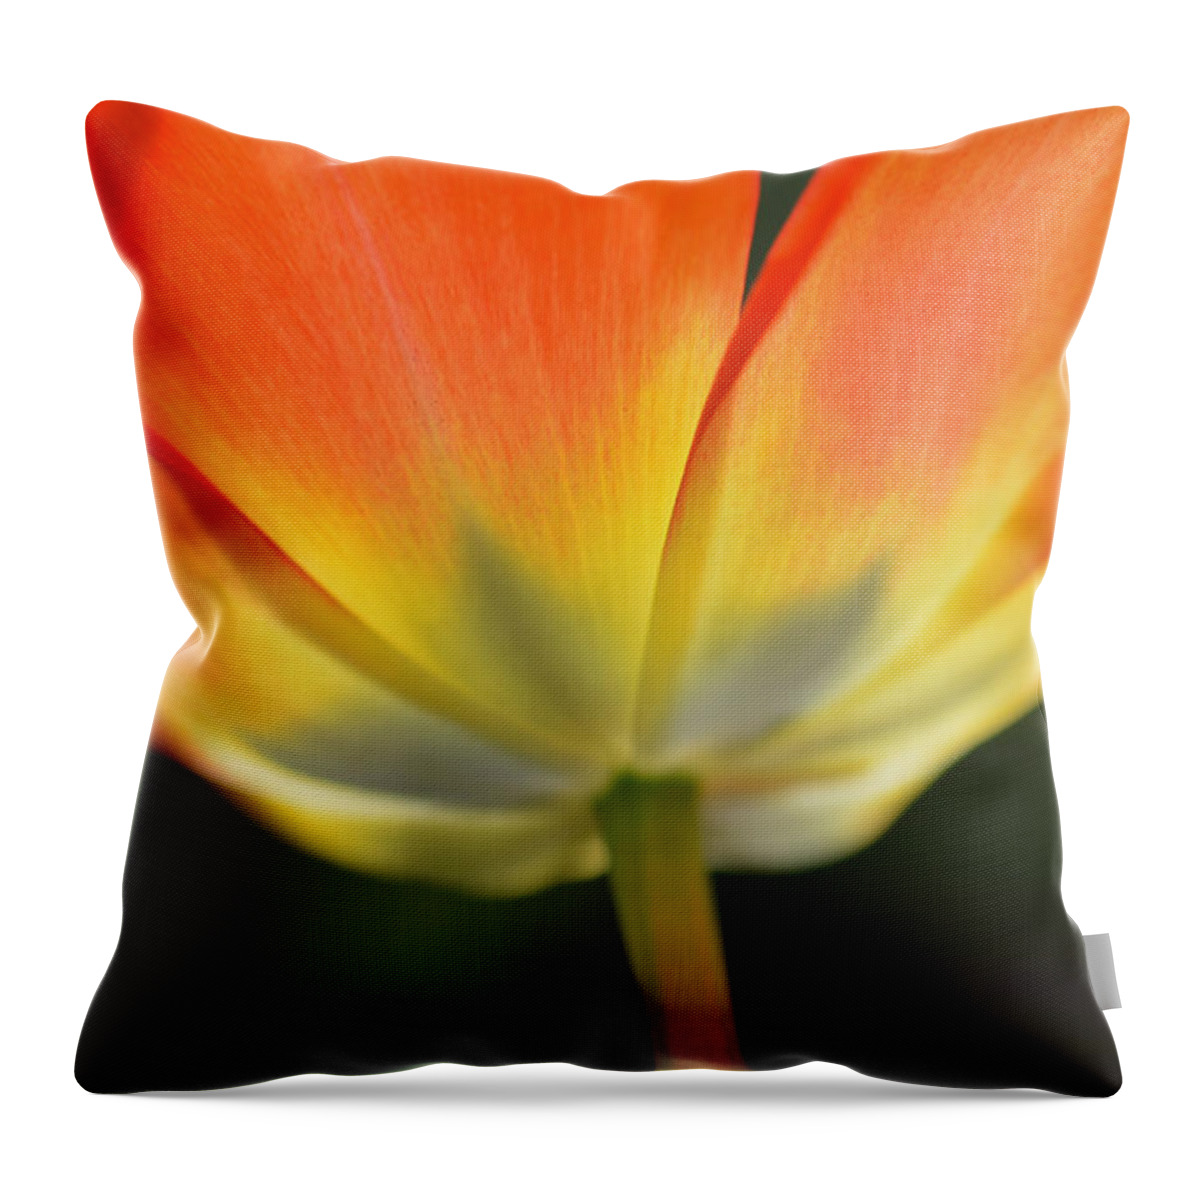 Tulip Throw Pillow featuring the photograph One Tulip by JoAnn Lense